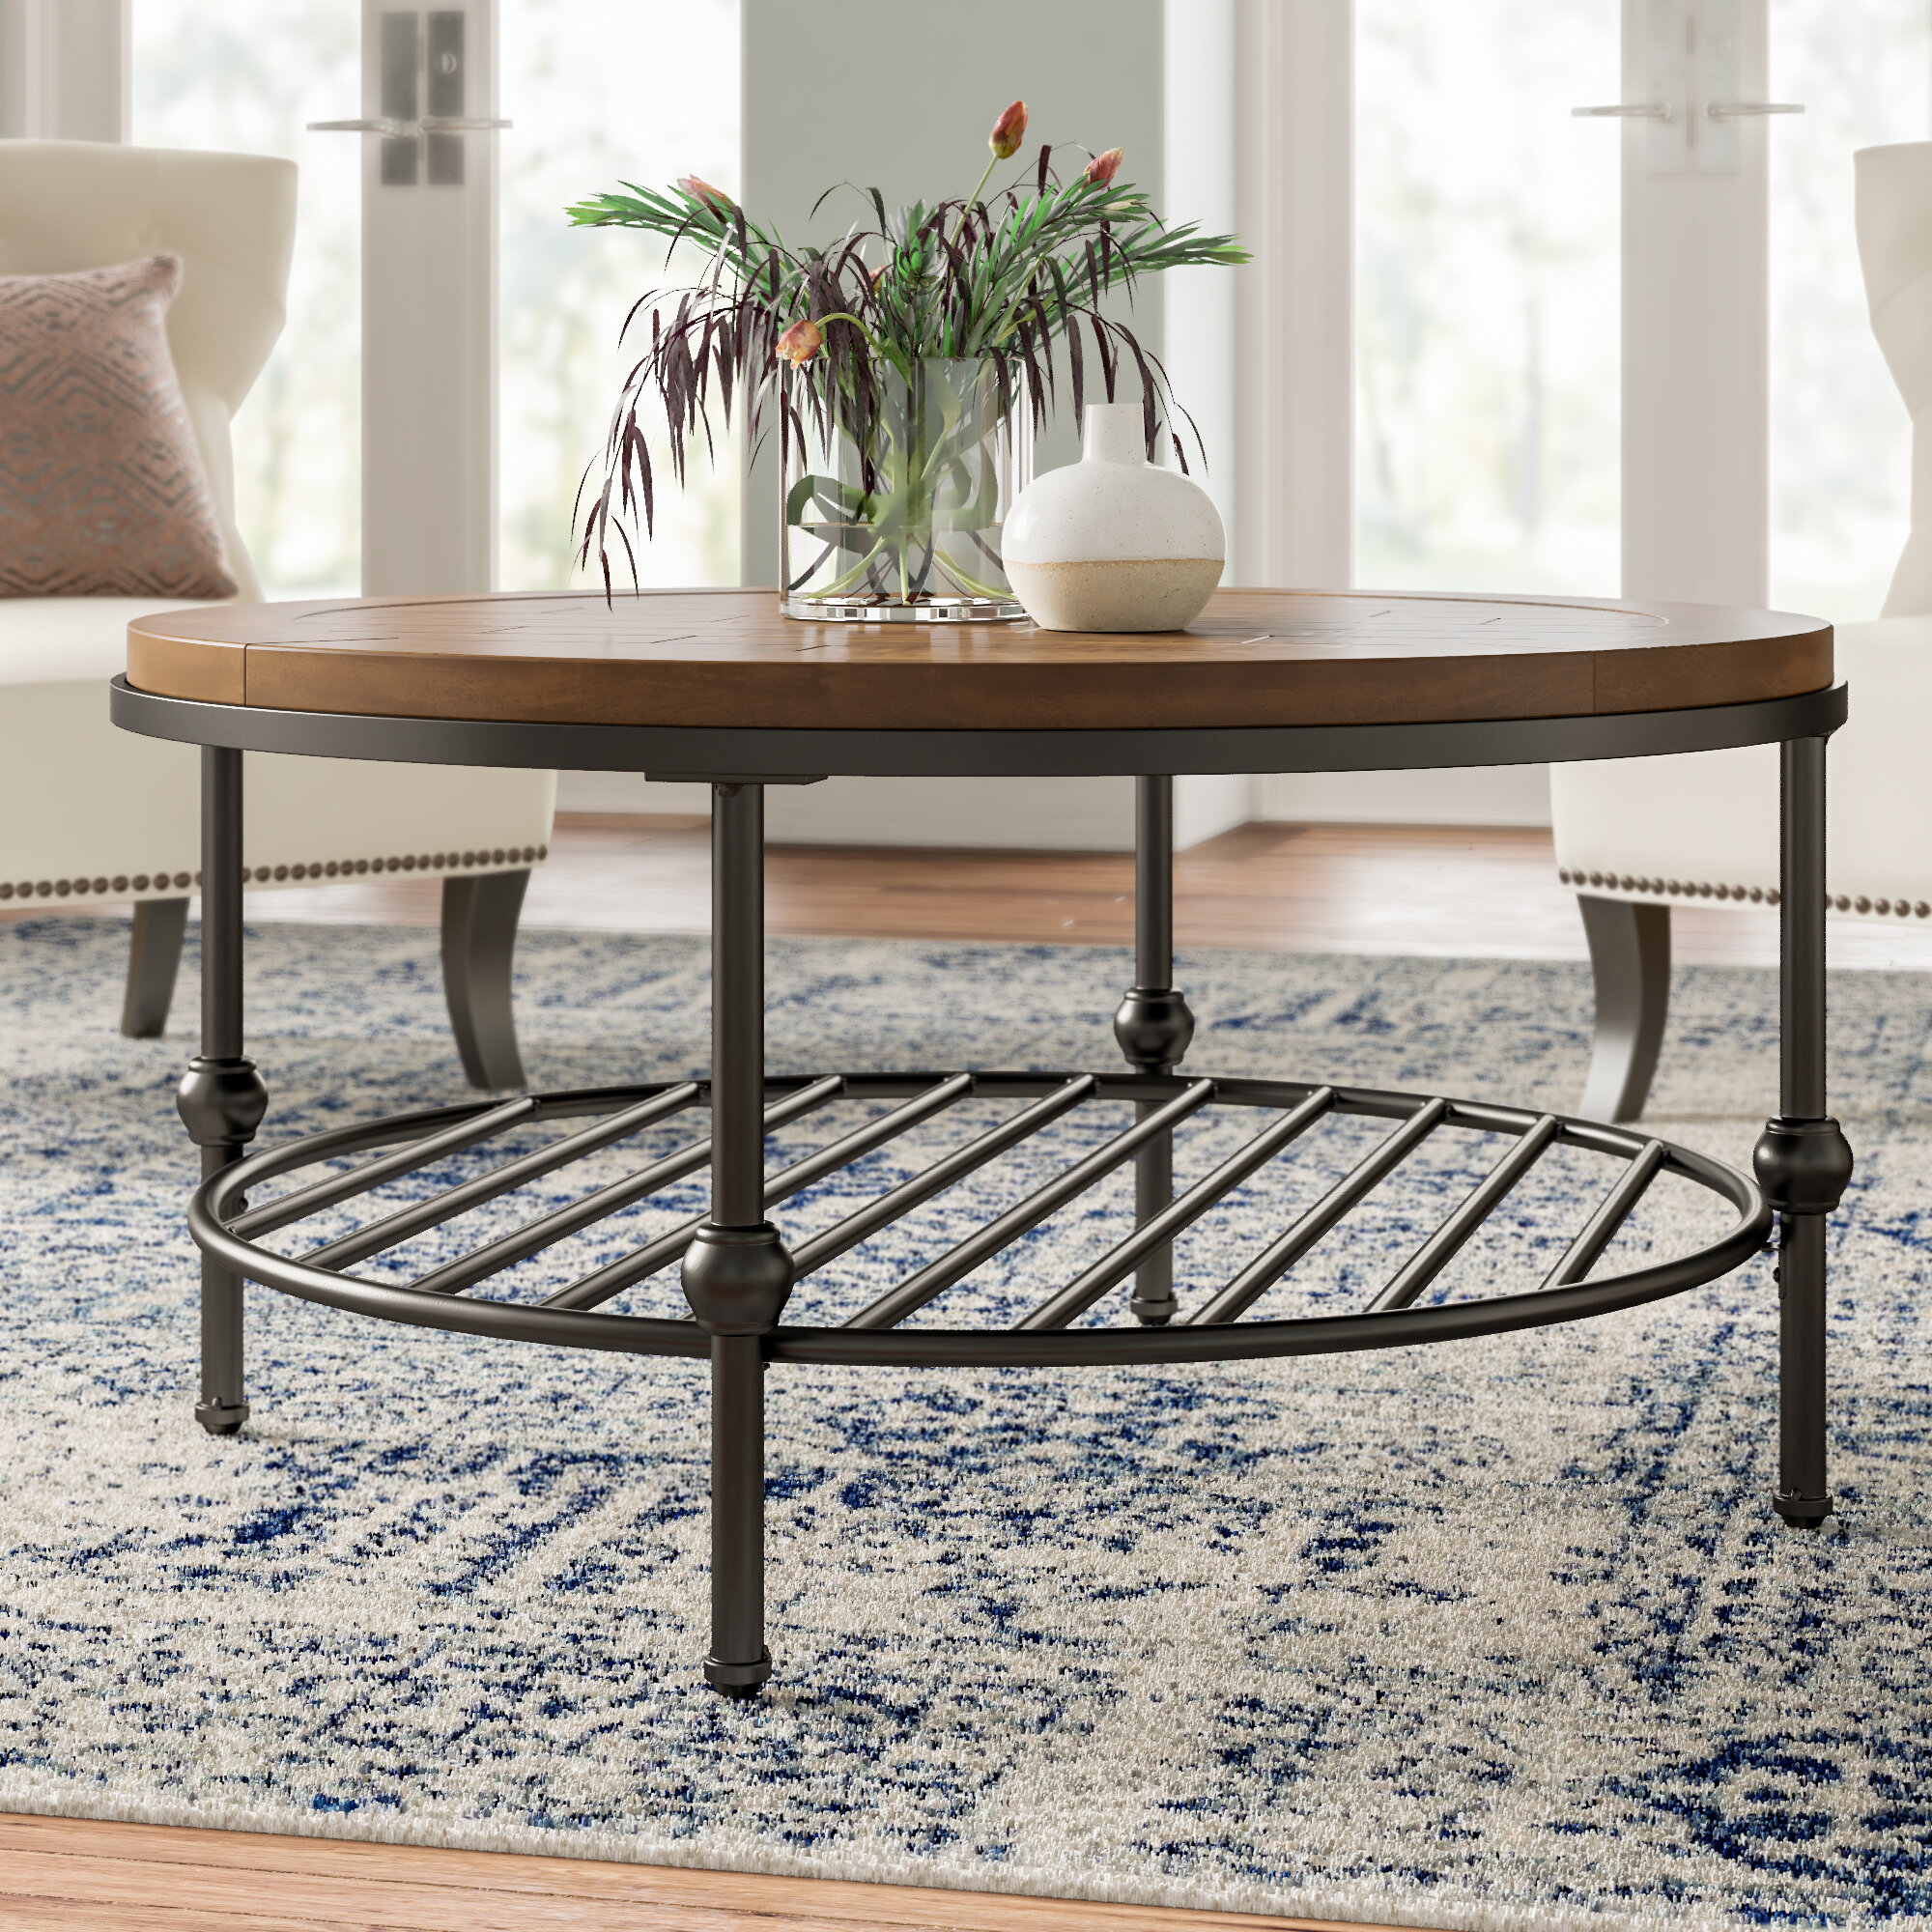 Wayfair Black Round Coffee Tables You Ll Love In 2021 Enjoy free shipping on most stuff, even big stuff. wayfair black round coffee tables you